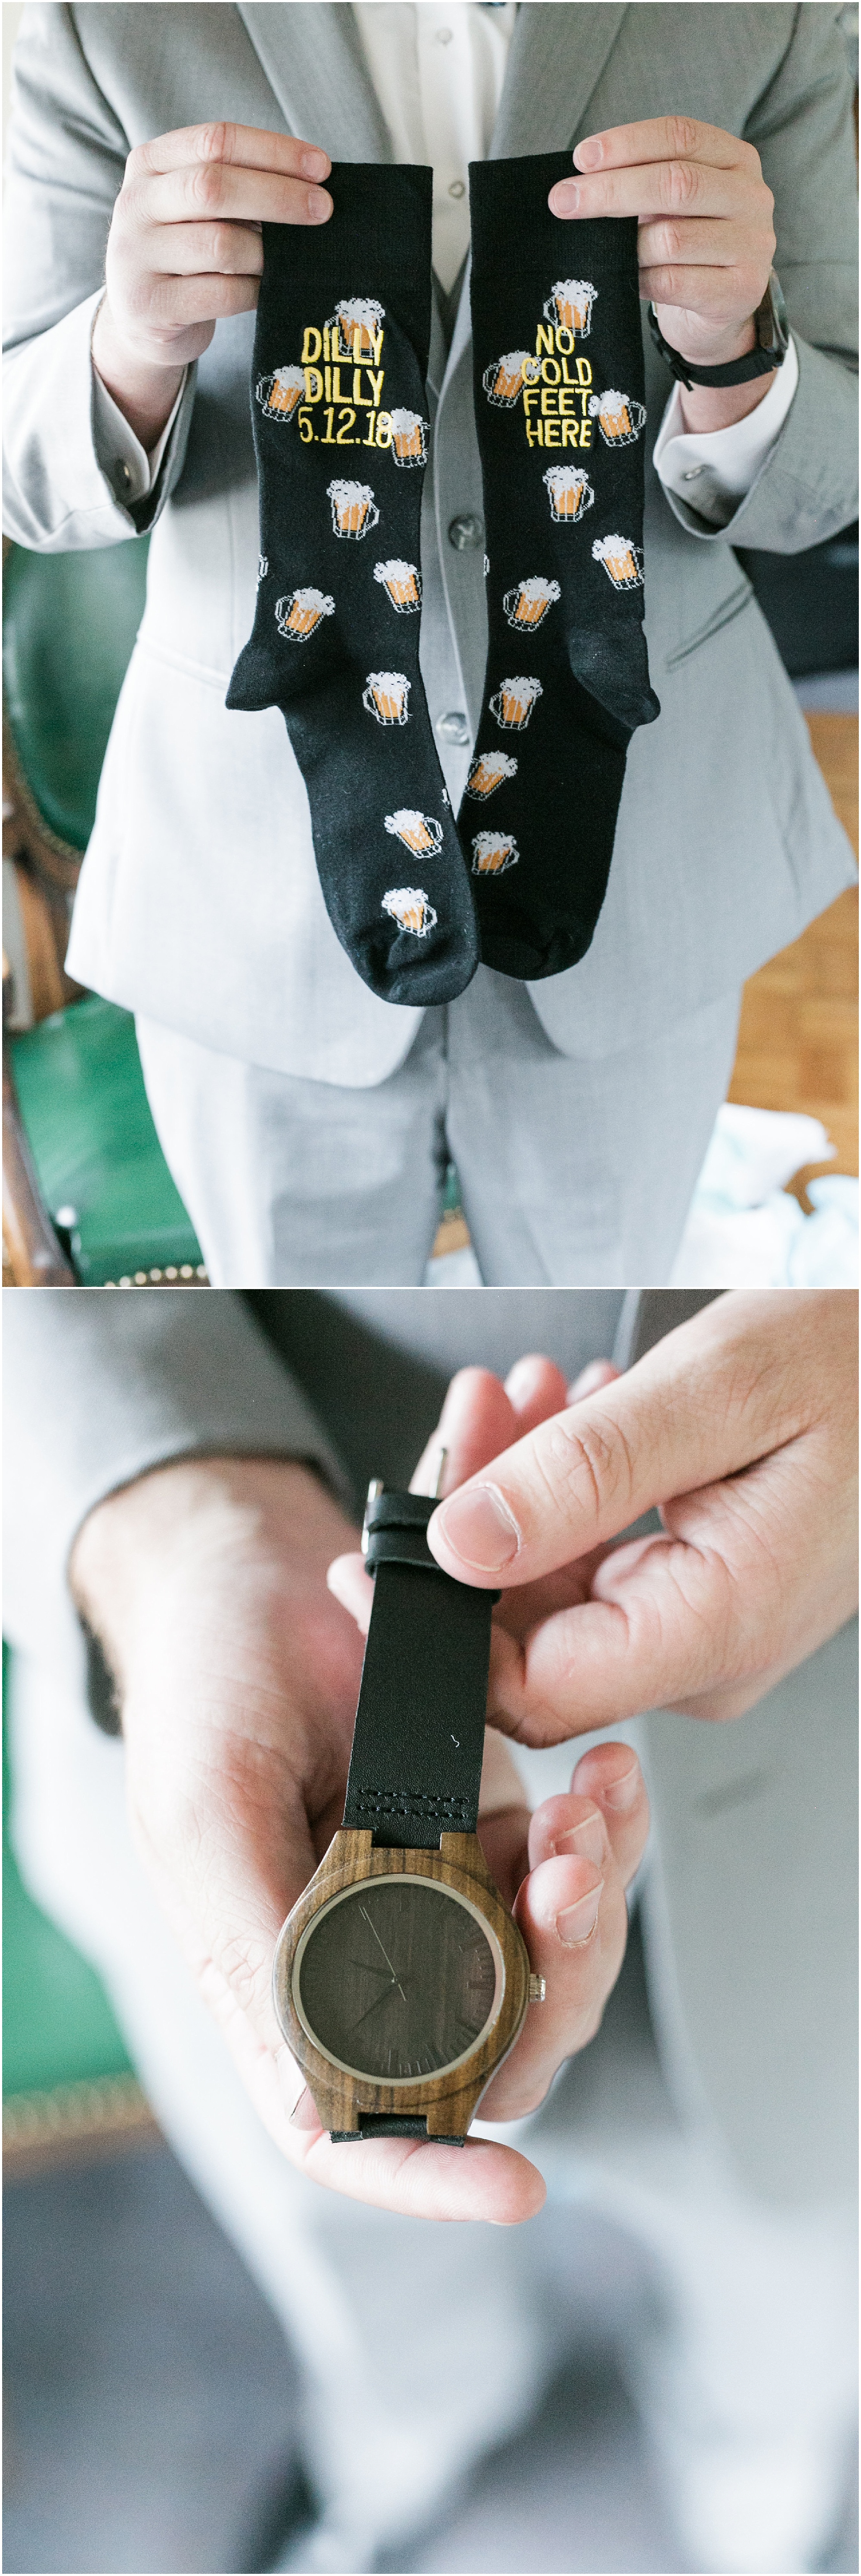 Groom showing off socks and a watch given to him for a wedding gift.